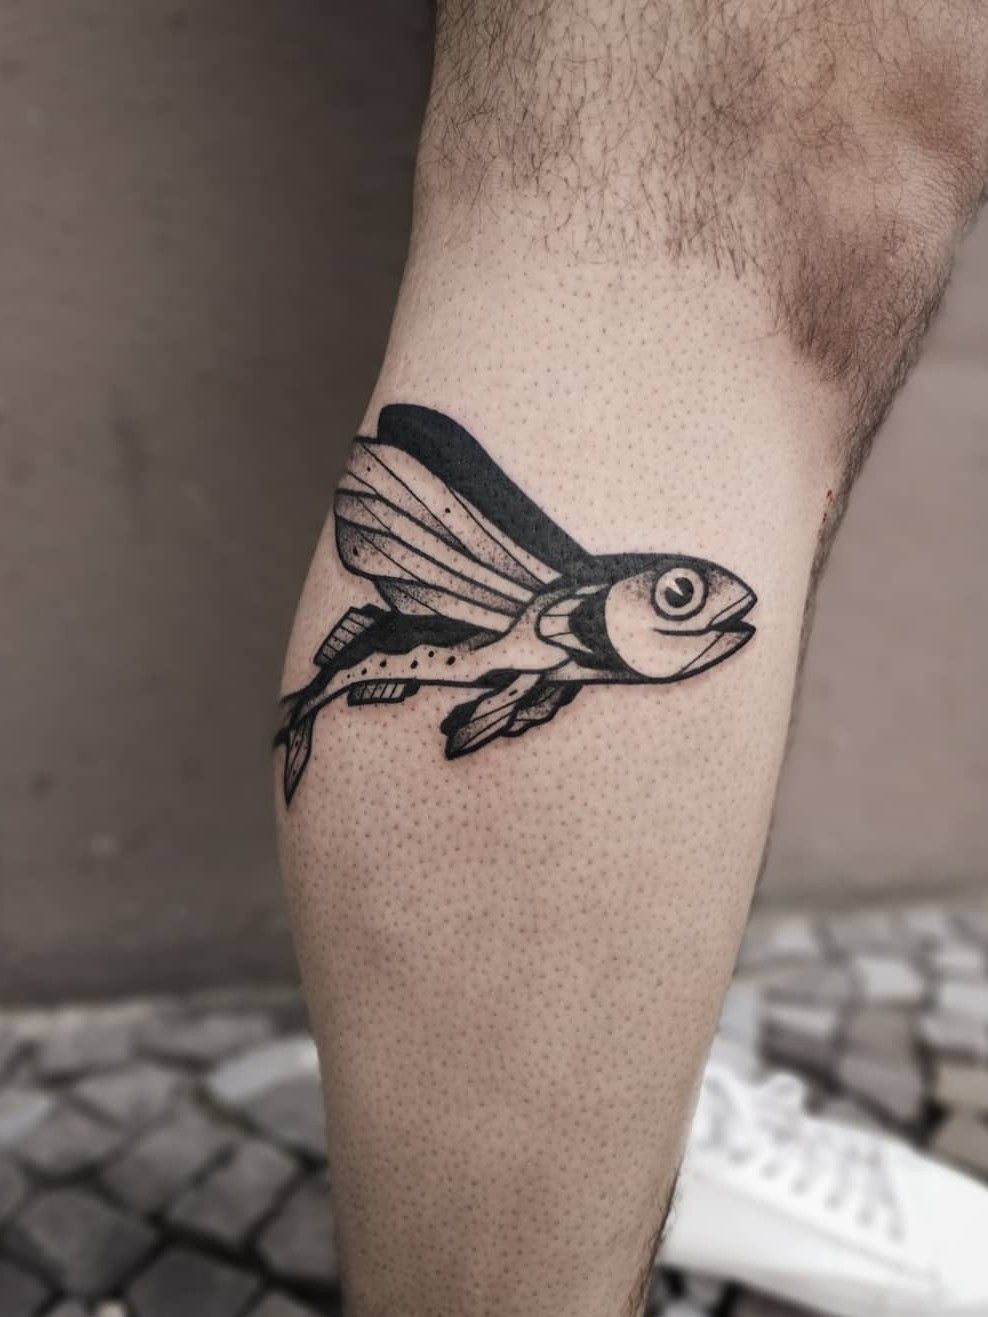 Always living in a wildest dream trying to be a flying fish  Done by  Danni at Just Tattoo studio in Guangzhou China  rtattoos